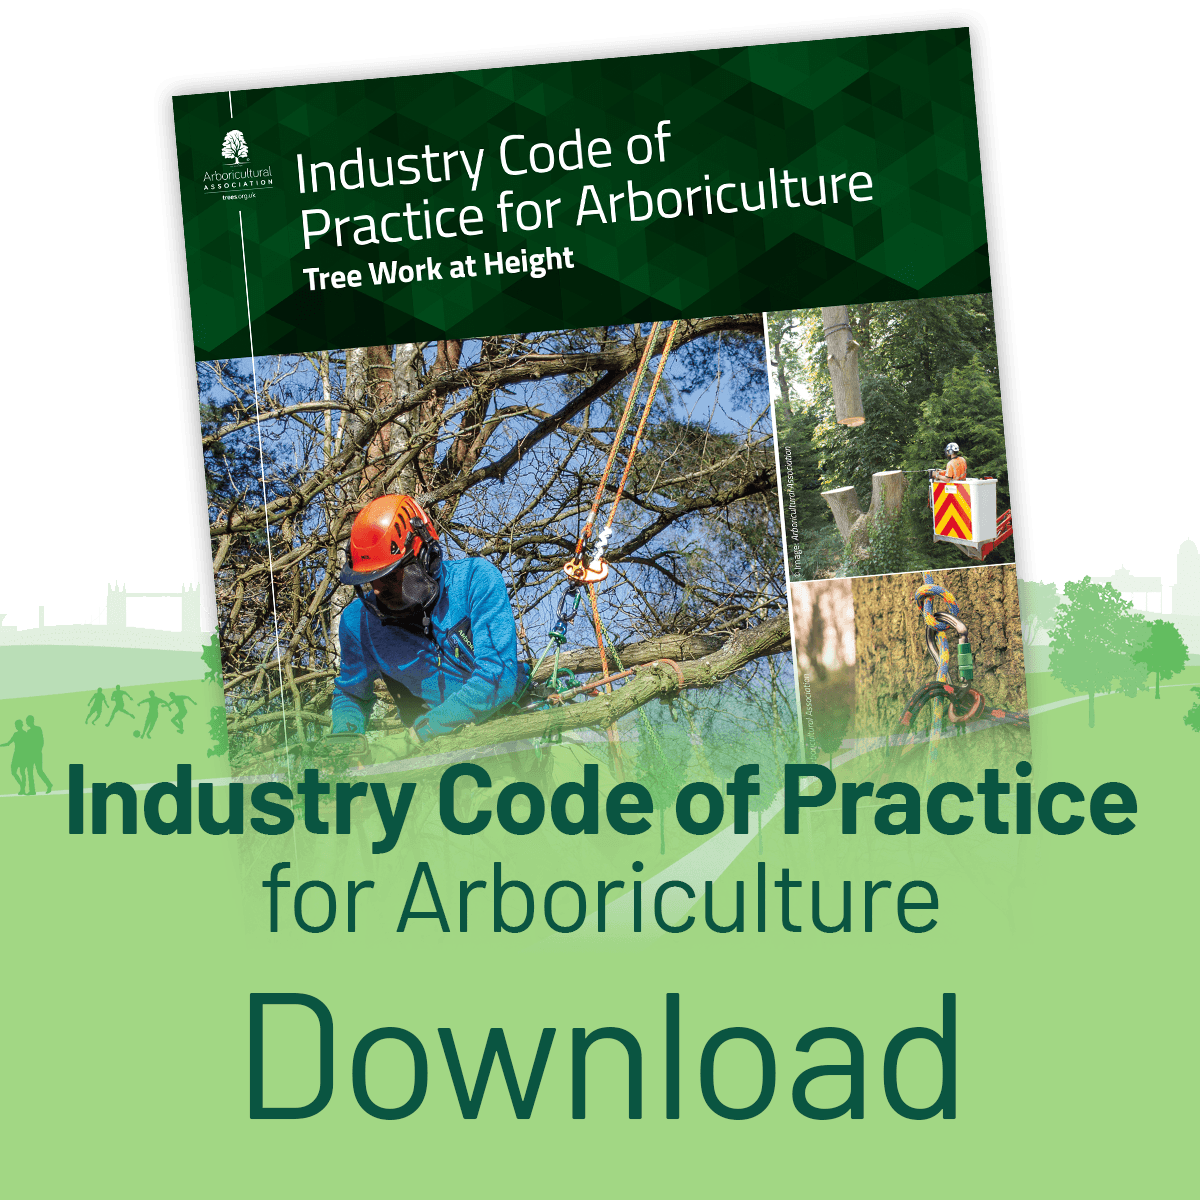 Download the Industry Code of Practice: Tree Work at Height